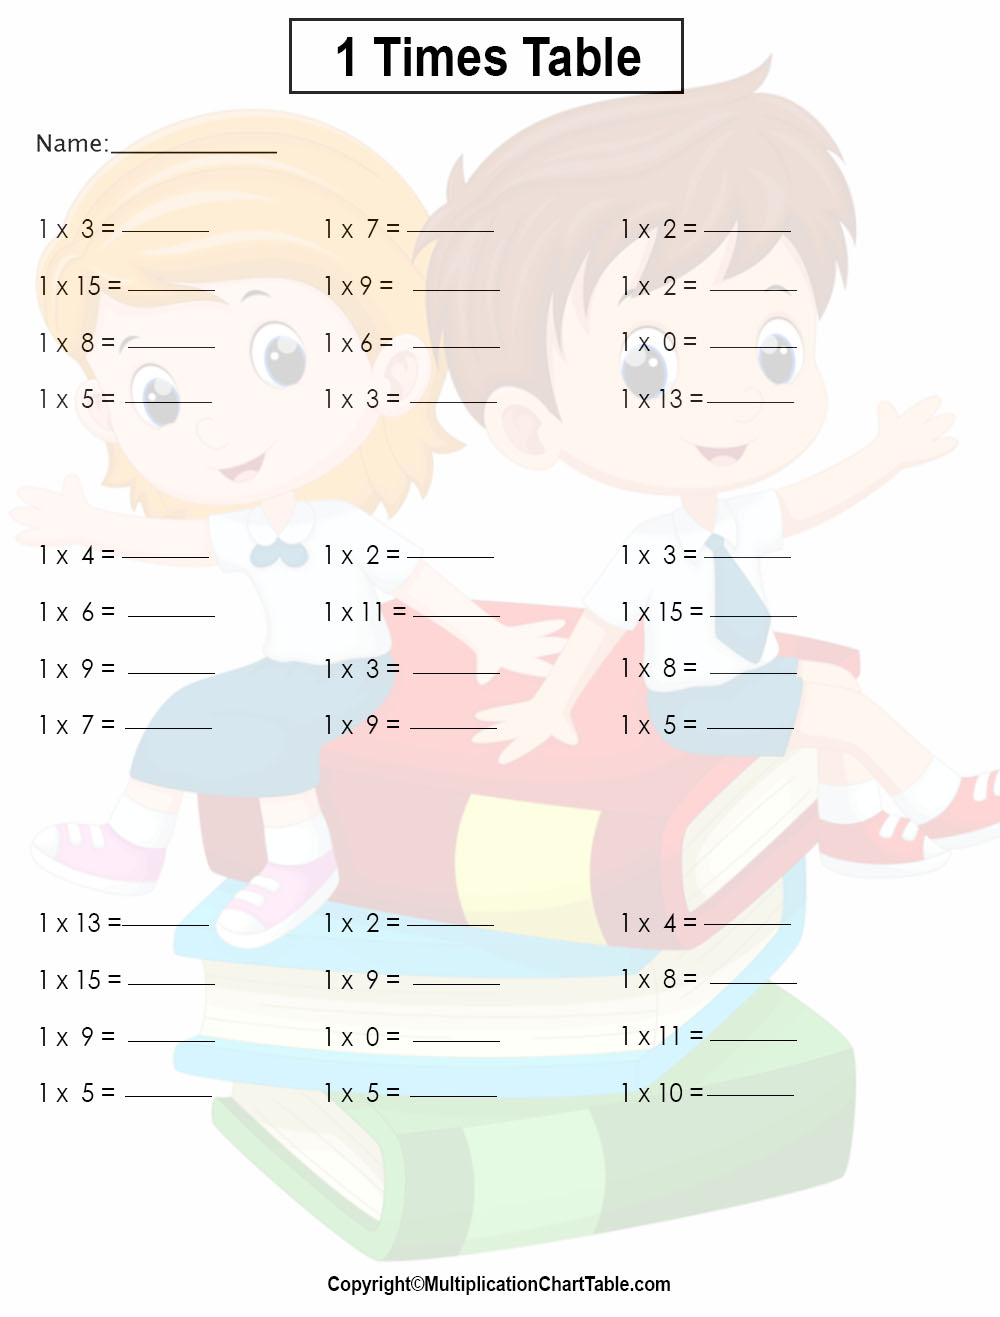 1 times table worksheets